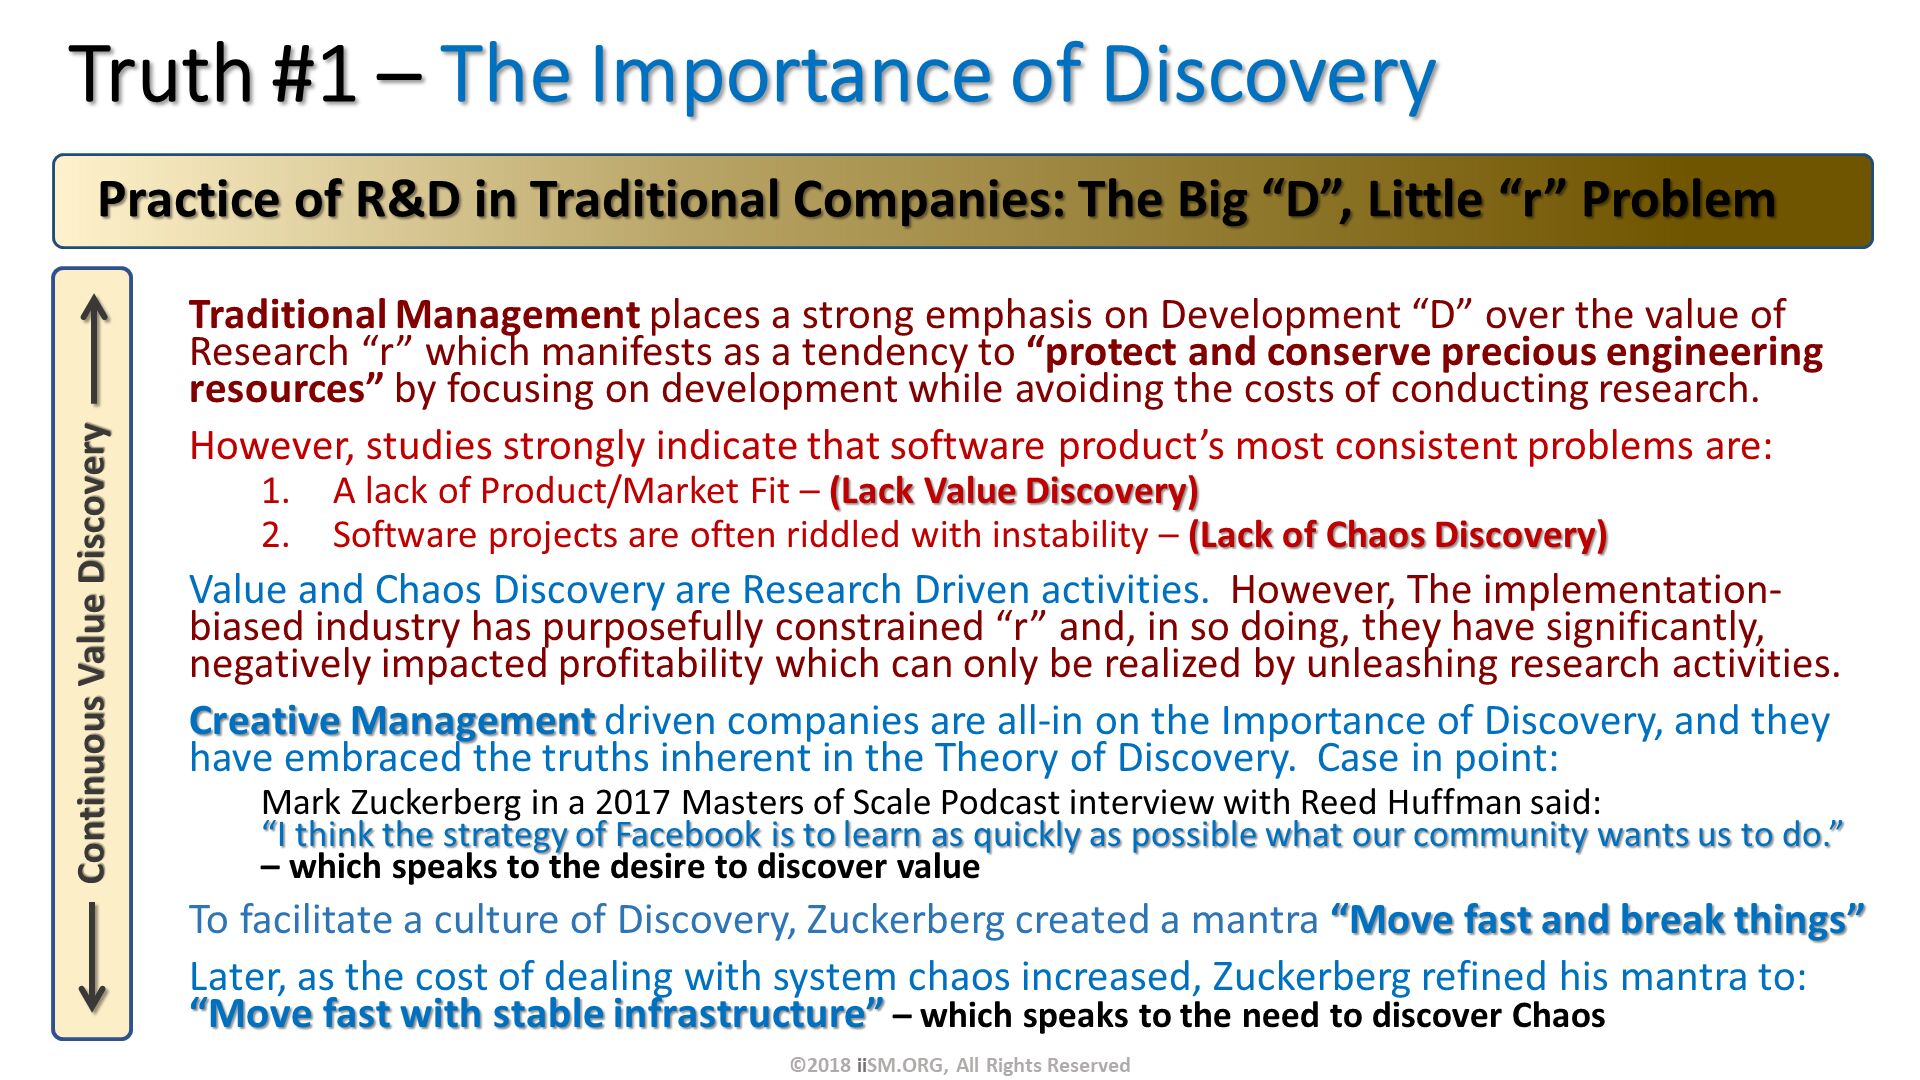 Truth #1 – The Importance of Discovery. Traditional Management places a strong emphasis on Development “D” over the value of Research “r” which manifests as a tendency to “protect and conserve precious engineering resources” by focusing on development while avoiding the costs of conducting research.
However, studies strongly indicate that software product’s most consistent problems are:
A lack of Product/Market Fit – (Lack Value Discovery)
Software projects are often riddled with instability – (Lack of Chaos Discovery)  
Value and Chaos Discovery are Research Driven activities.  However, The implementation-biased industry has purposefully constrained “r” and, in so doing, they have significantly, negatively impacted profitability which can only be realized by unleashing research activities.
Creative Management driven companies are all-in on the Importance of Discovery, and they have embraced the truths inherent in the Theory of Discovery.  Case in point:
Mark Zuckerberg in a 2017 Masters of Scale Podcast interview with Reed Huffman said: “I think the strategy of Facebook is to learn as quickly as possible what our community wants us to do.” – which speaks to the desire to discover value
To facilitate a culture of Discovery, Zuckerberg created a mantra “Move fast and break things”
Later, as the cost of dealing with system chaos increased, Zuckerberg refined his mantra to: “Move fast with stable infrastructure” – which speaks to the need to discover Chaos.   Practice of R&D in Traditional Companies: The Big “D”, Little “r” Problem. ©2018 iiSM.ORG, All Rights Reserved. 